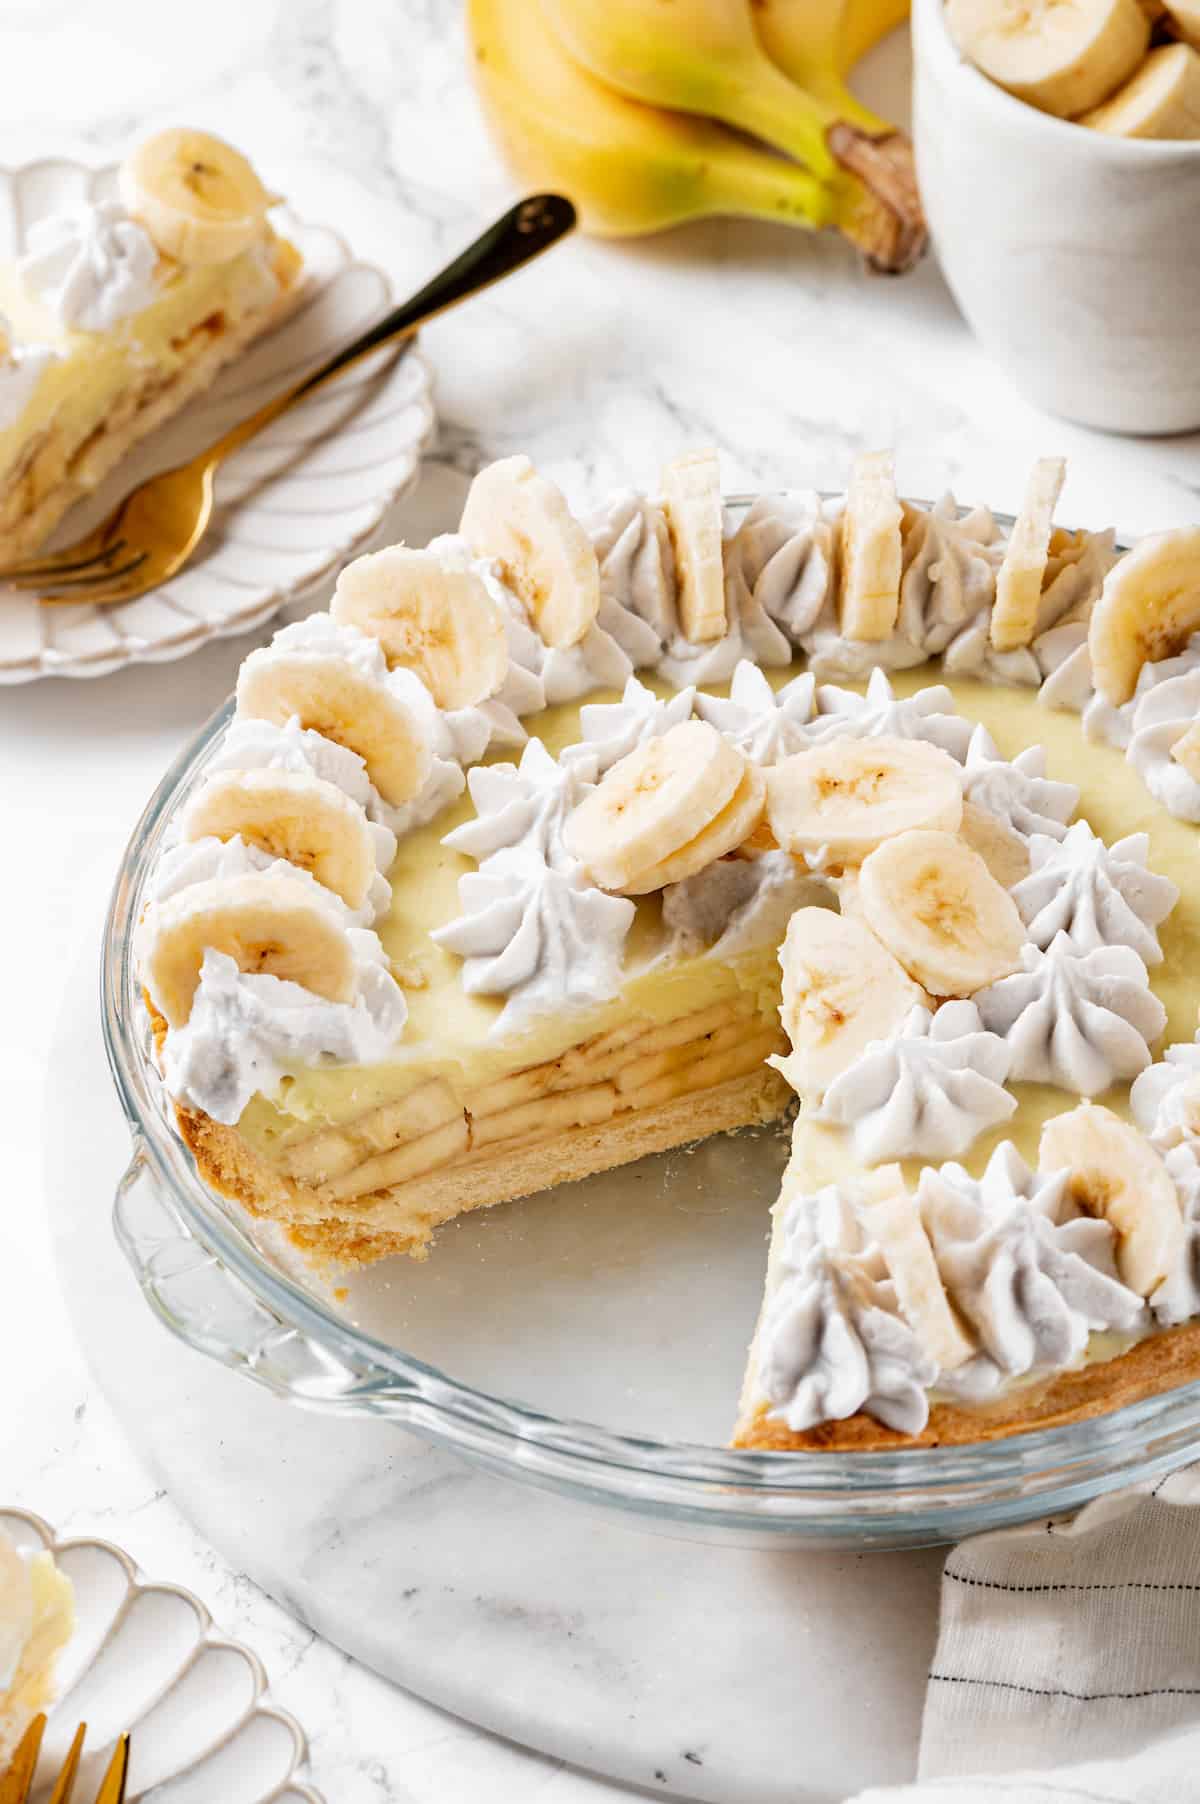 Banana cream pie in glass pie plate with two slices removed